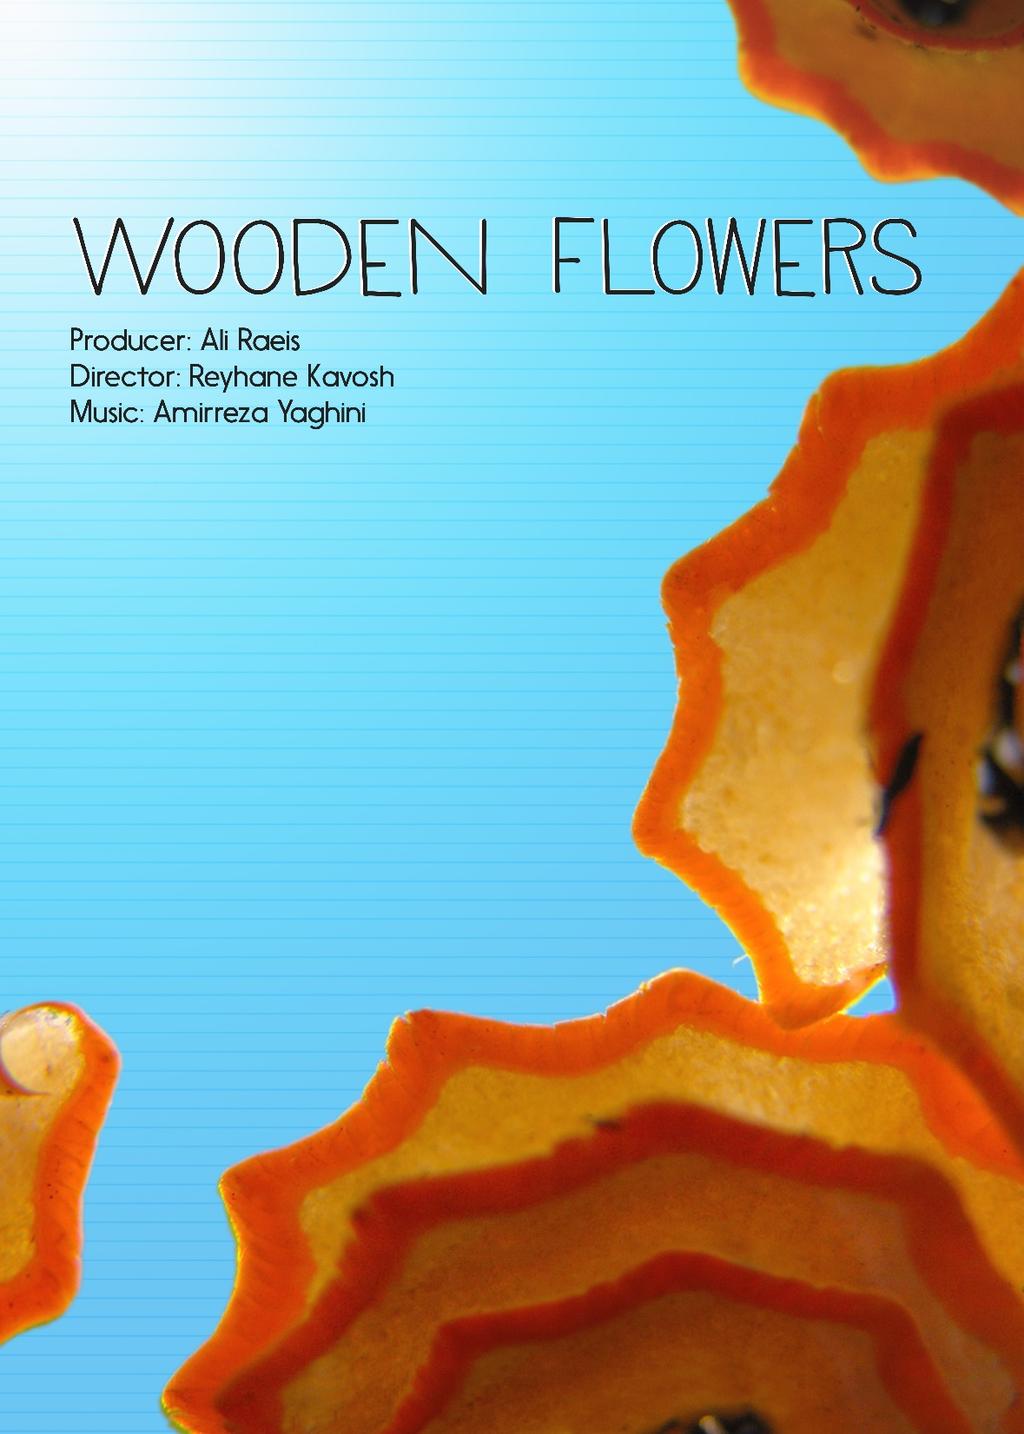 11. Wooden Flowers Synopsis: someone here is lovesick and gifted his love flowers from his own being.